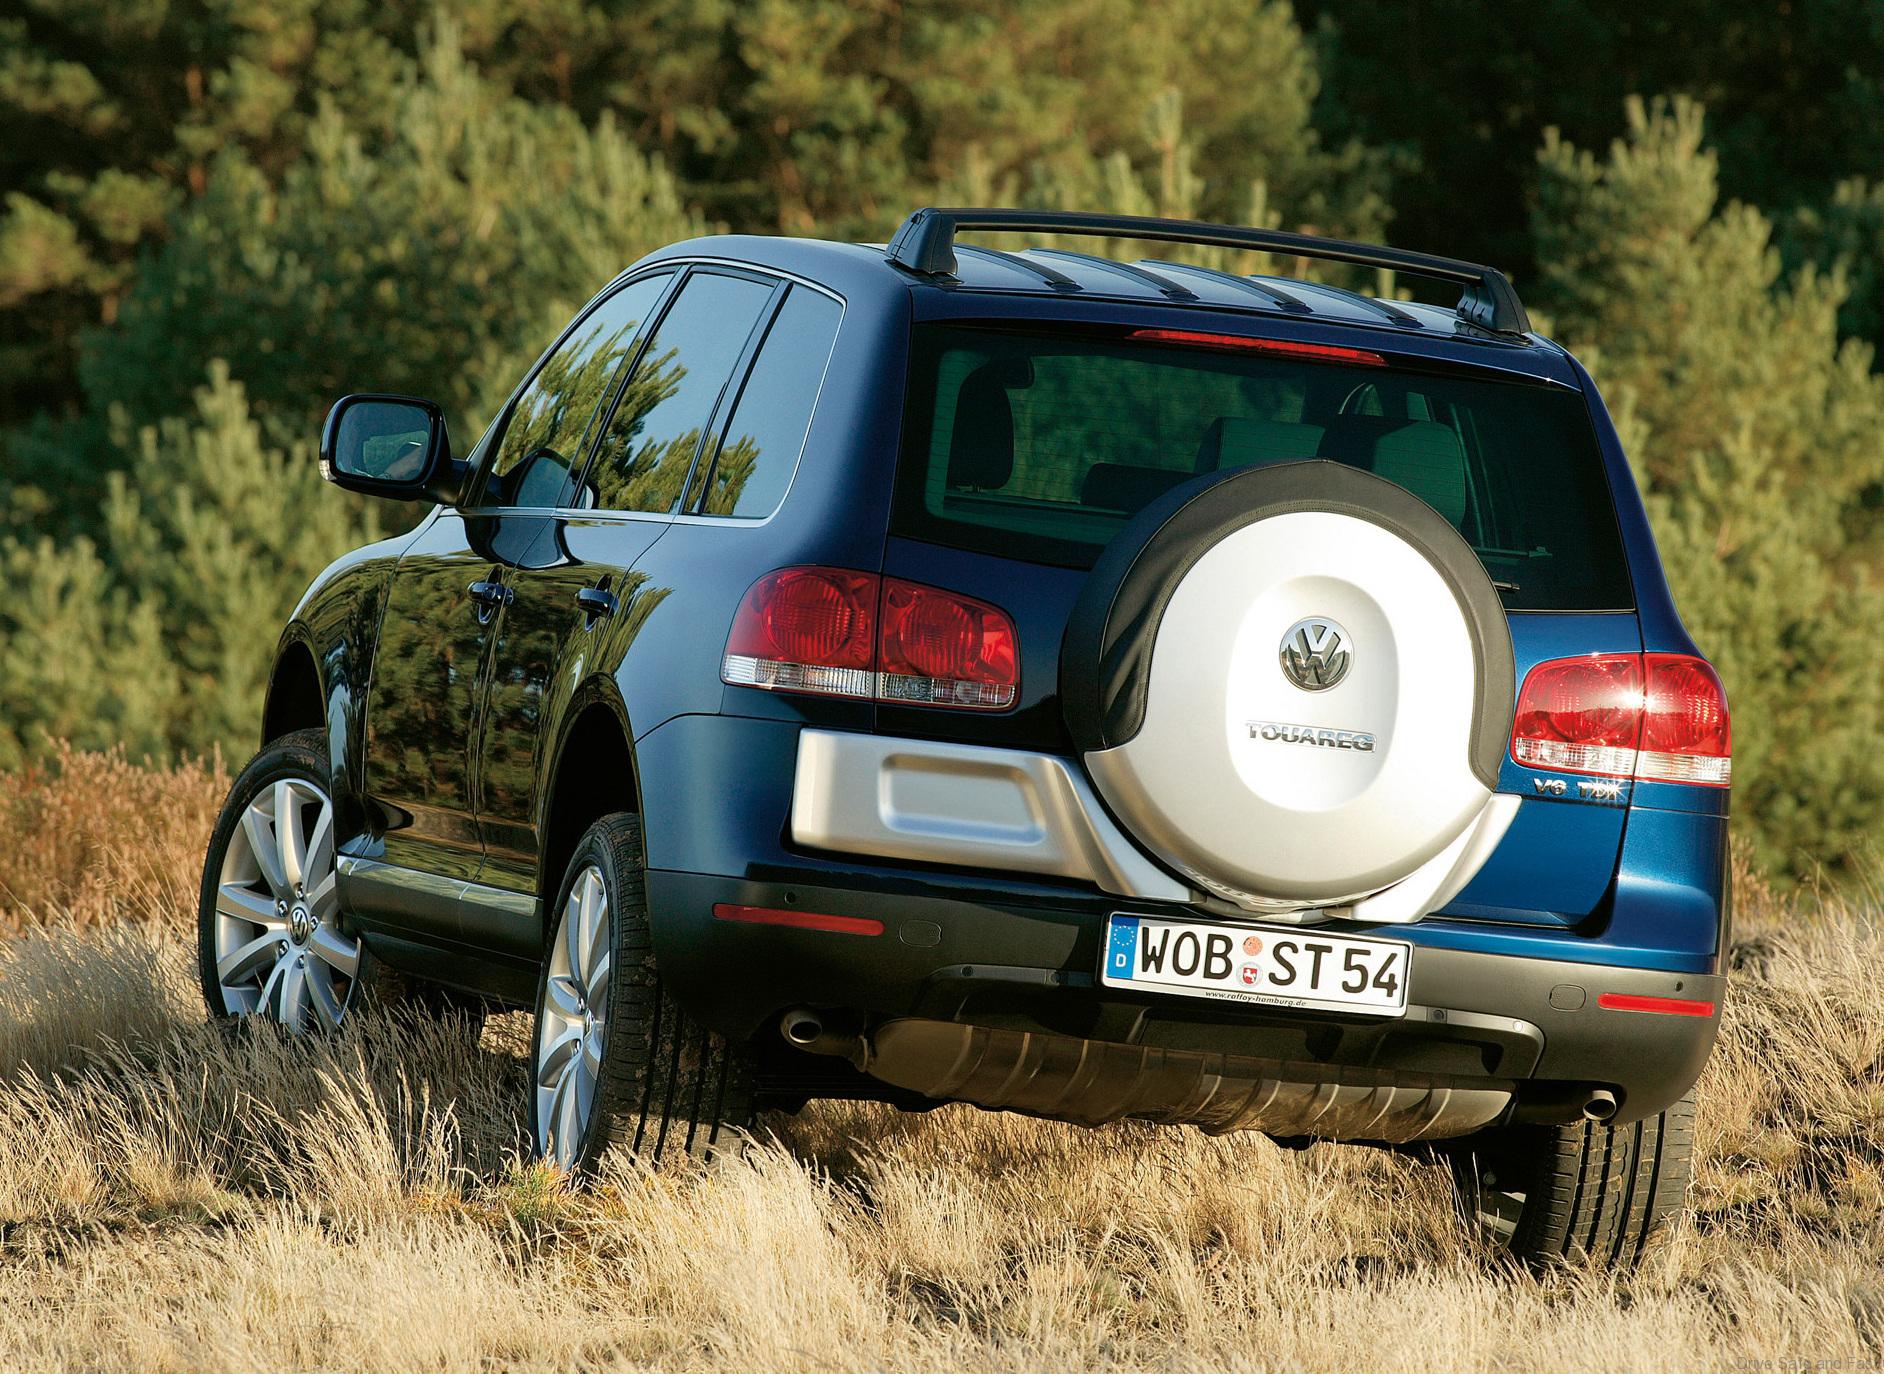 What happened to the 2005 VW TOUAREG 3.2L in the used car